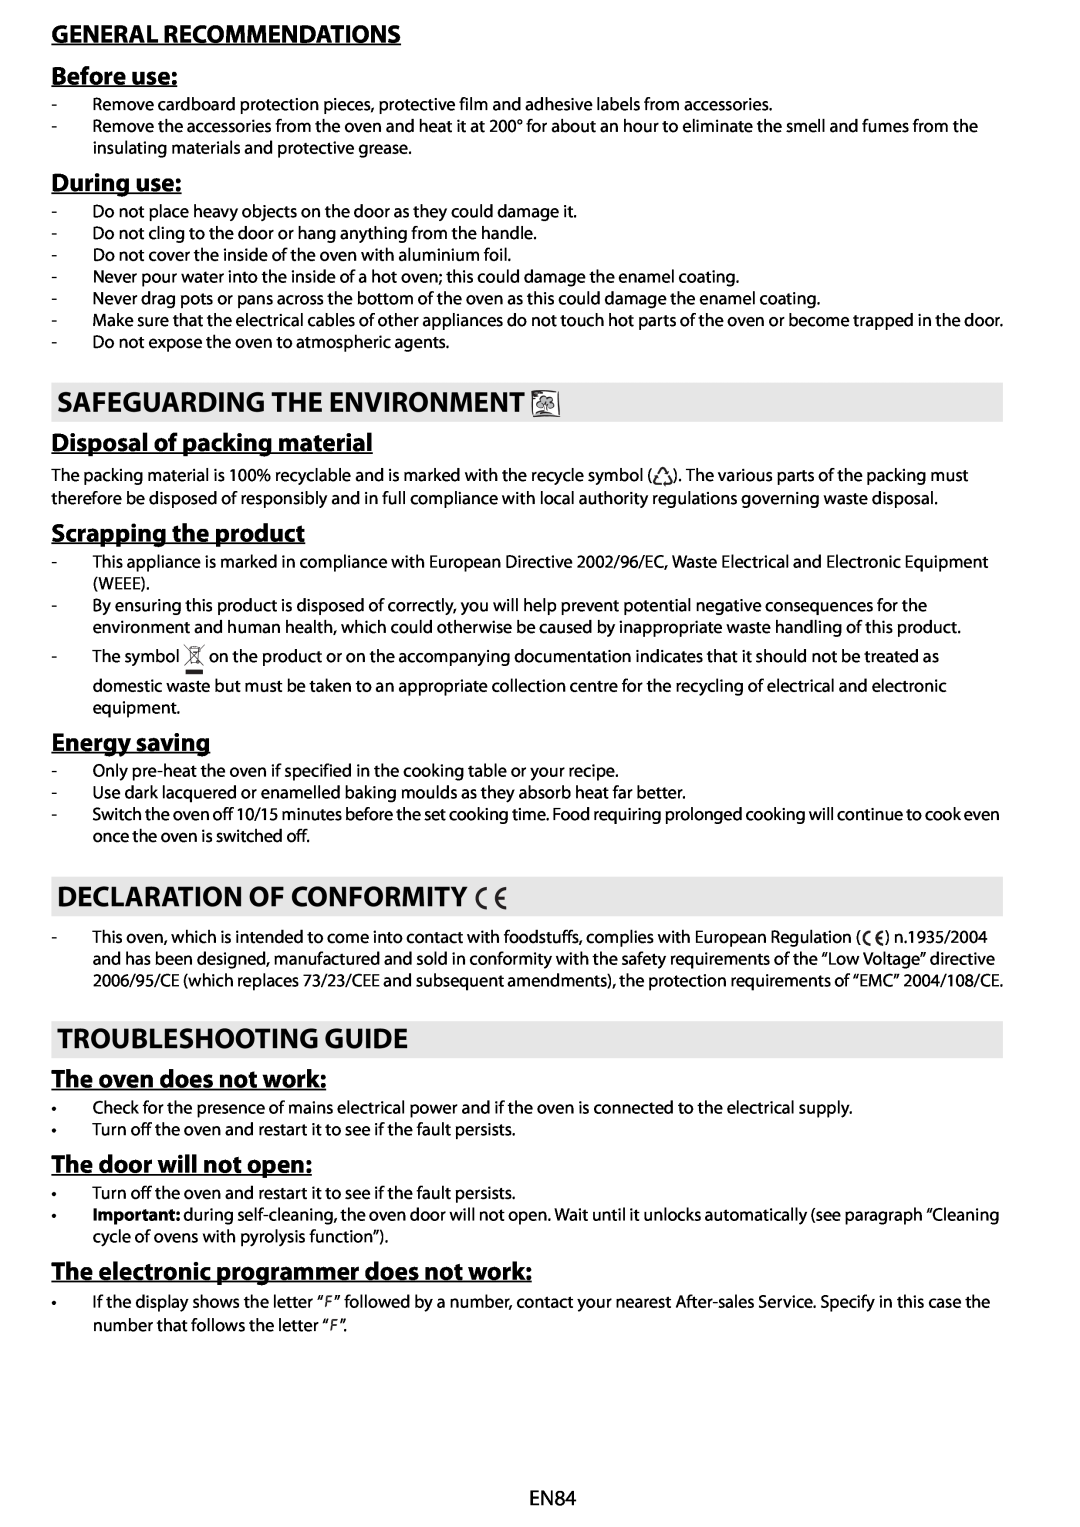 Whirlpool AKZM 663 manual Safeguarding The Environment, Declaration Of Conformity, Troubleshooting Guide, During use 